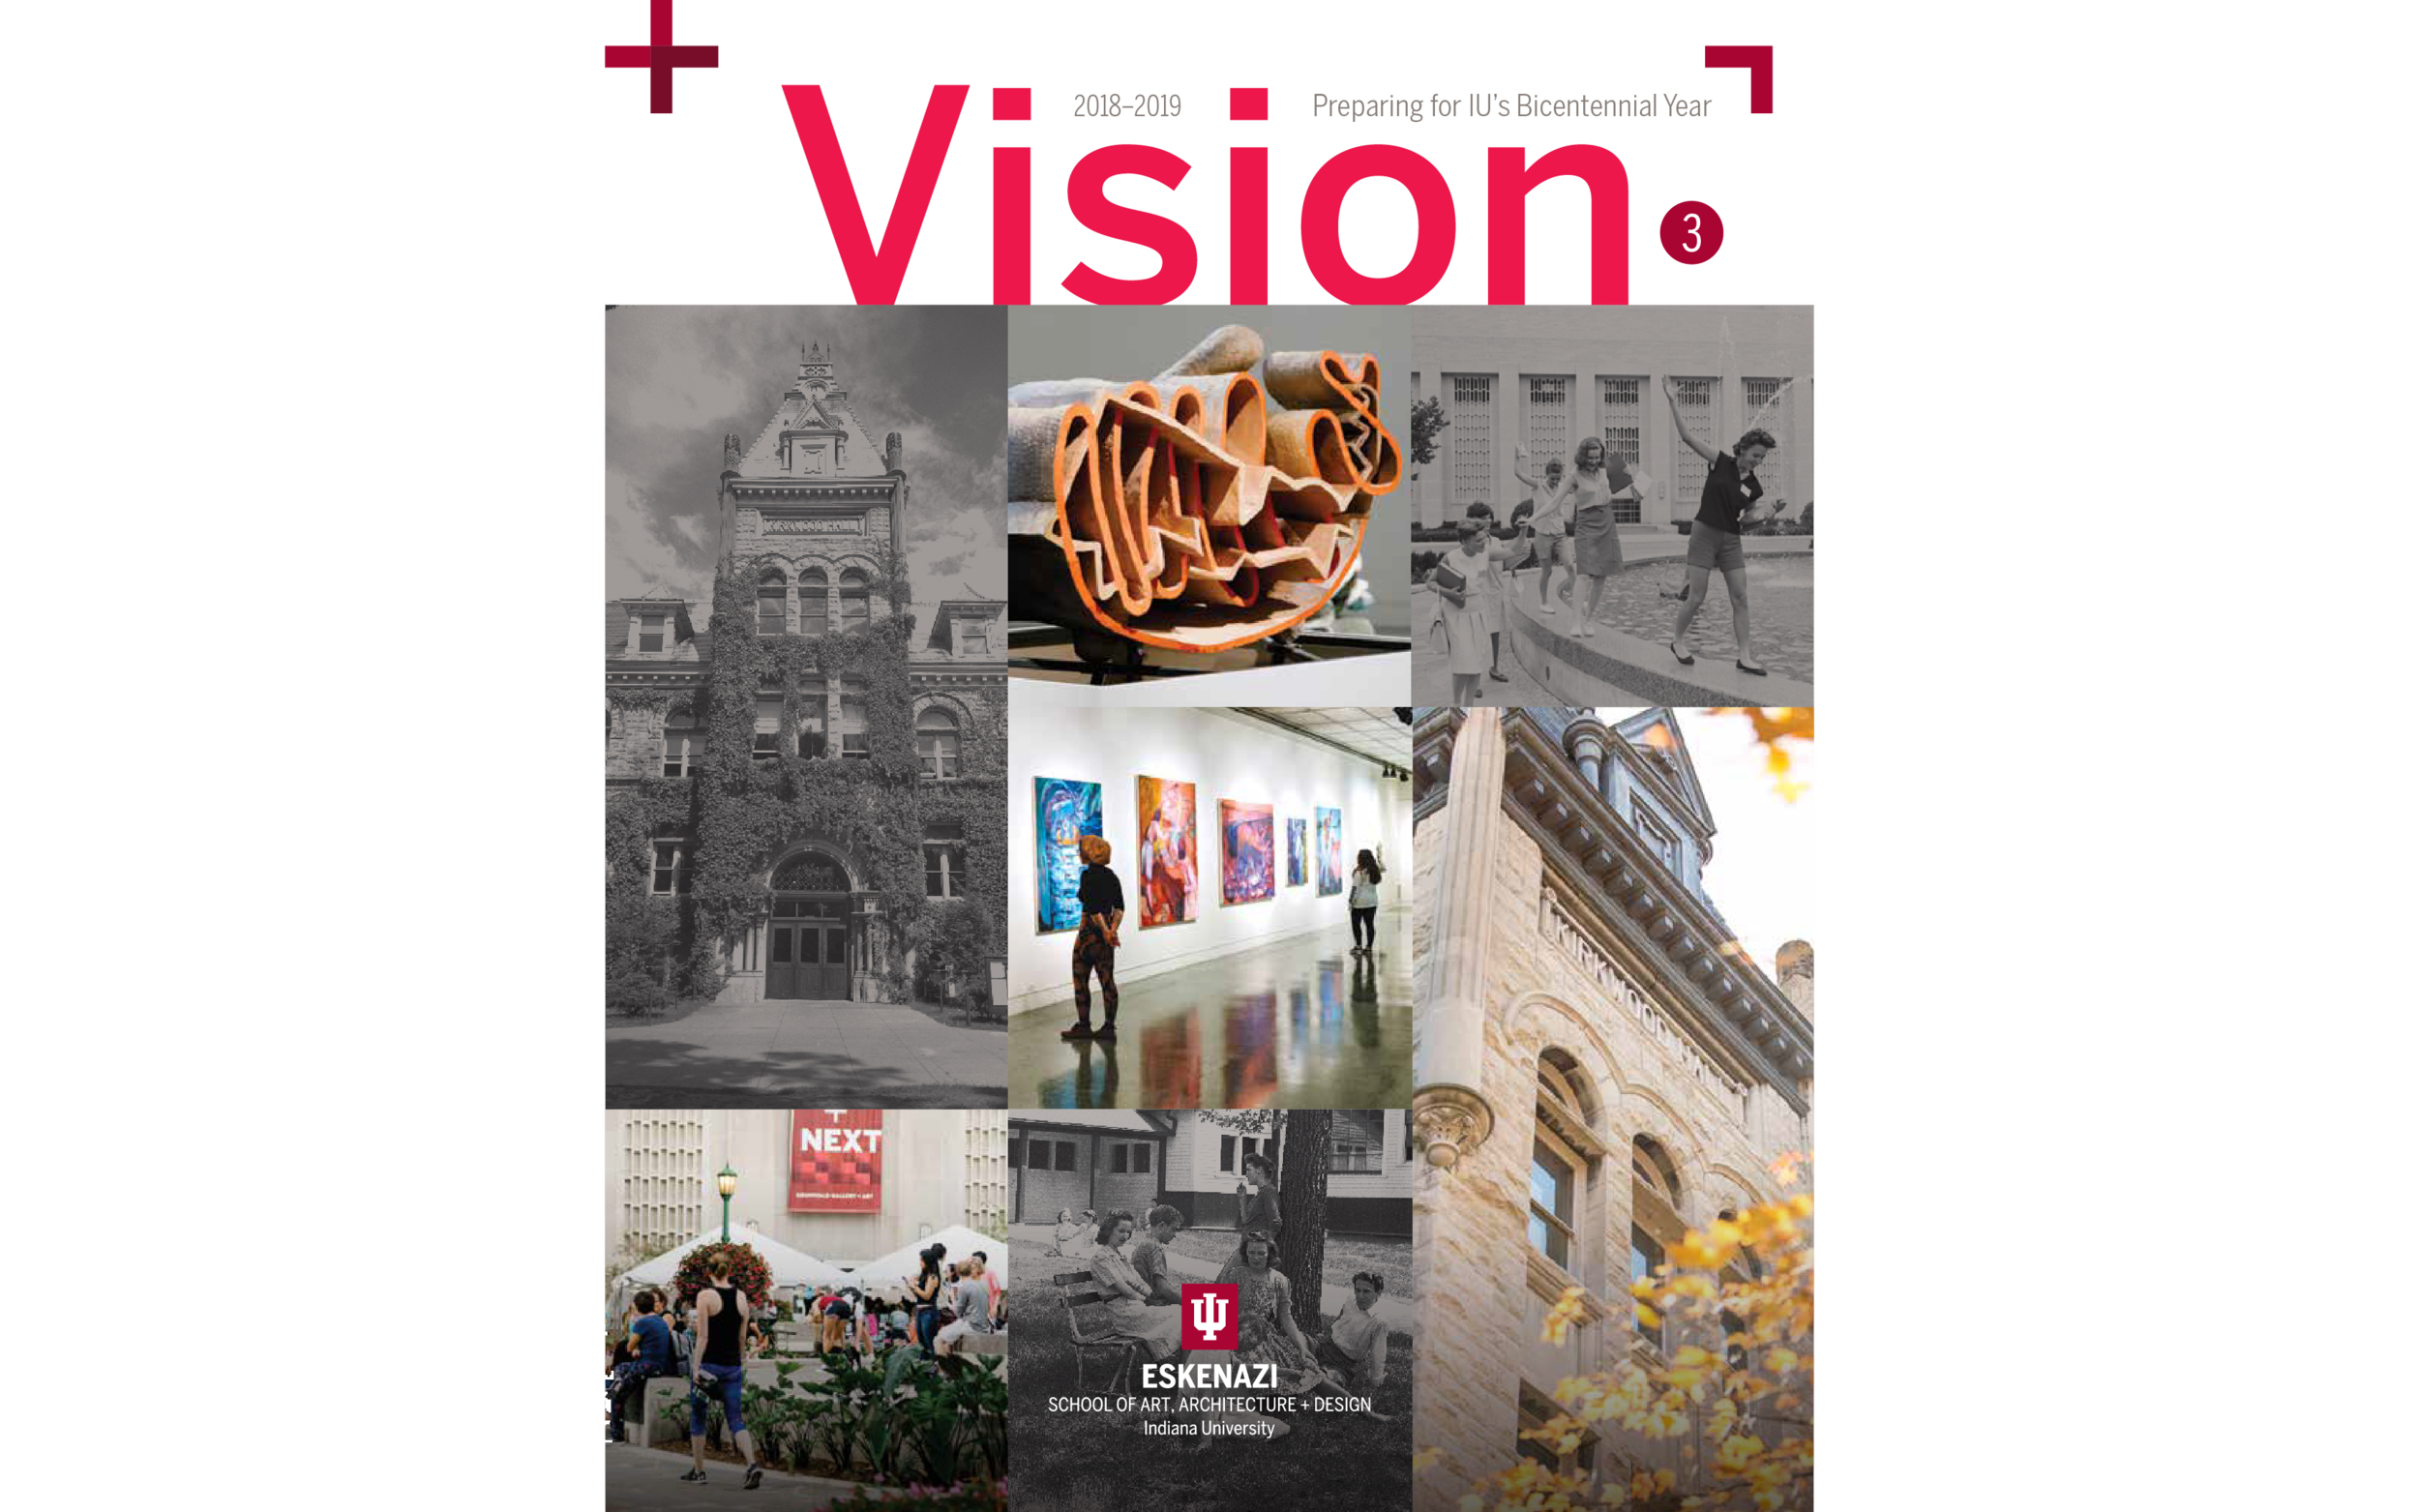  Image of cover of 2018-19 Eskenazi School annual report featuring the title “Vision” and a collage of images 